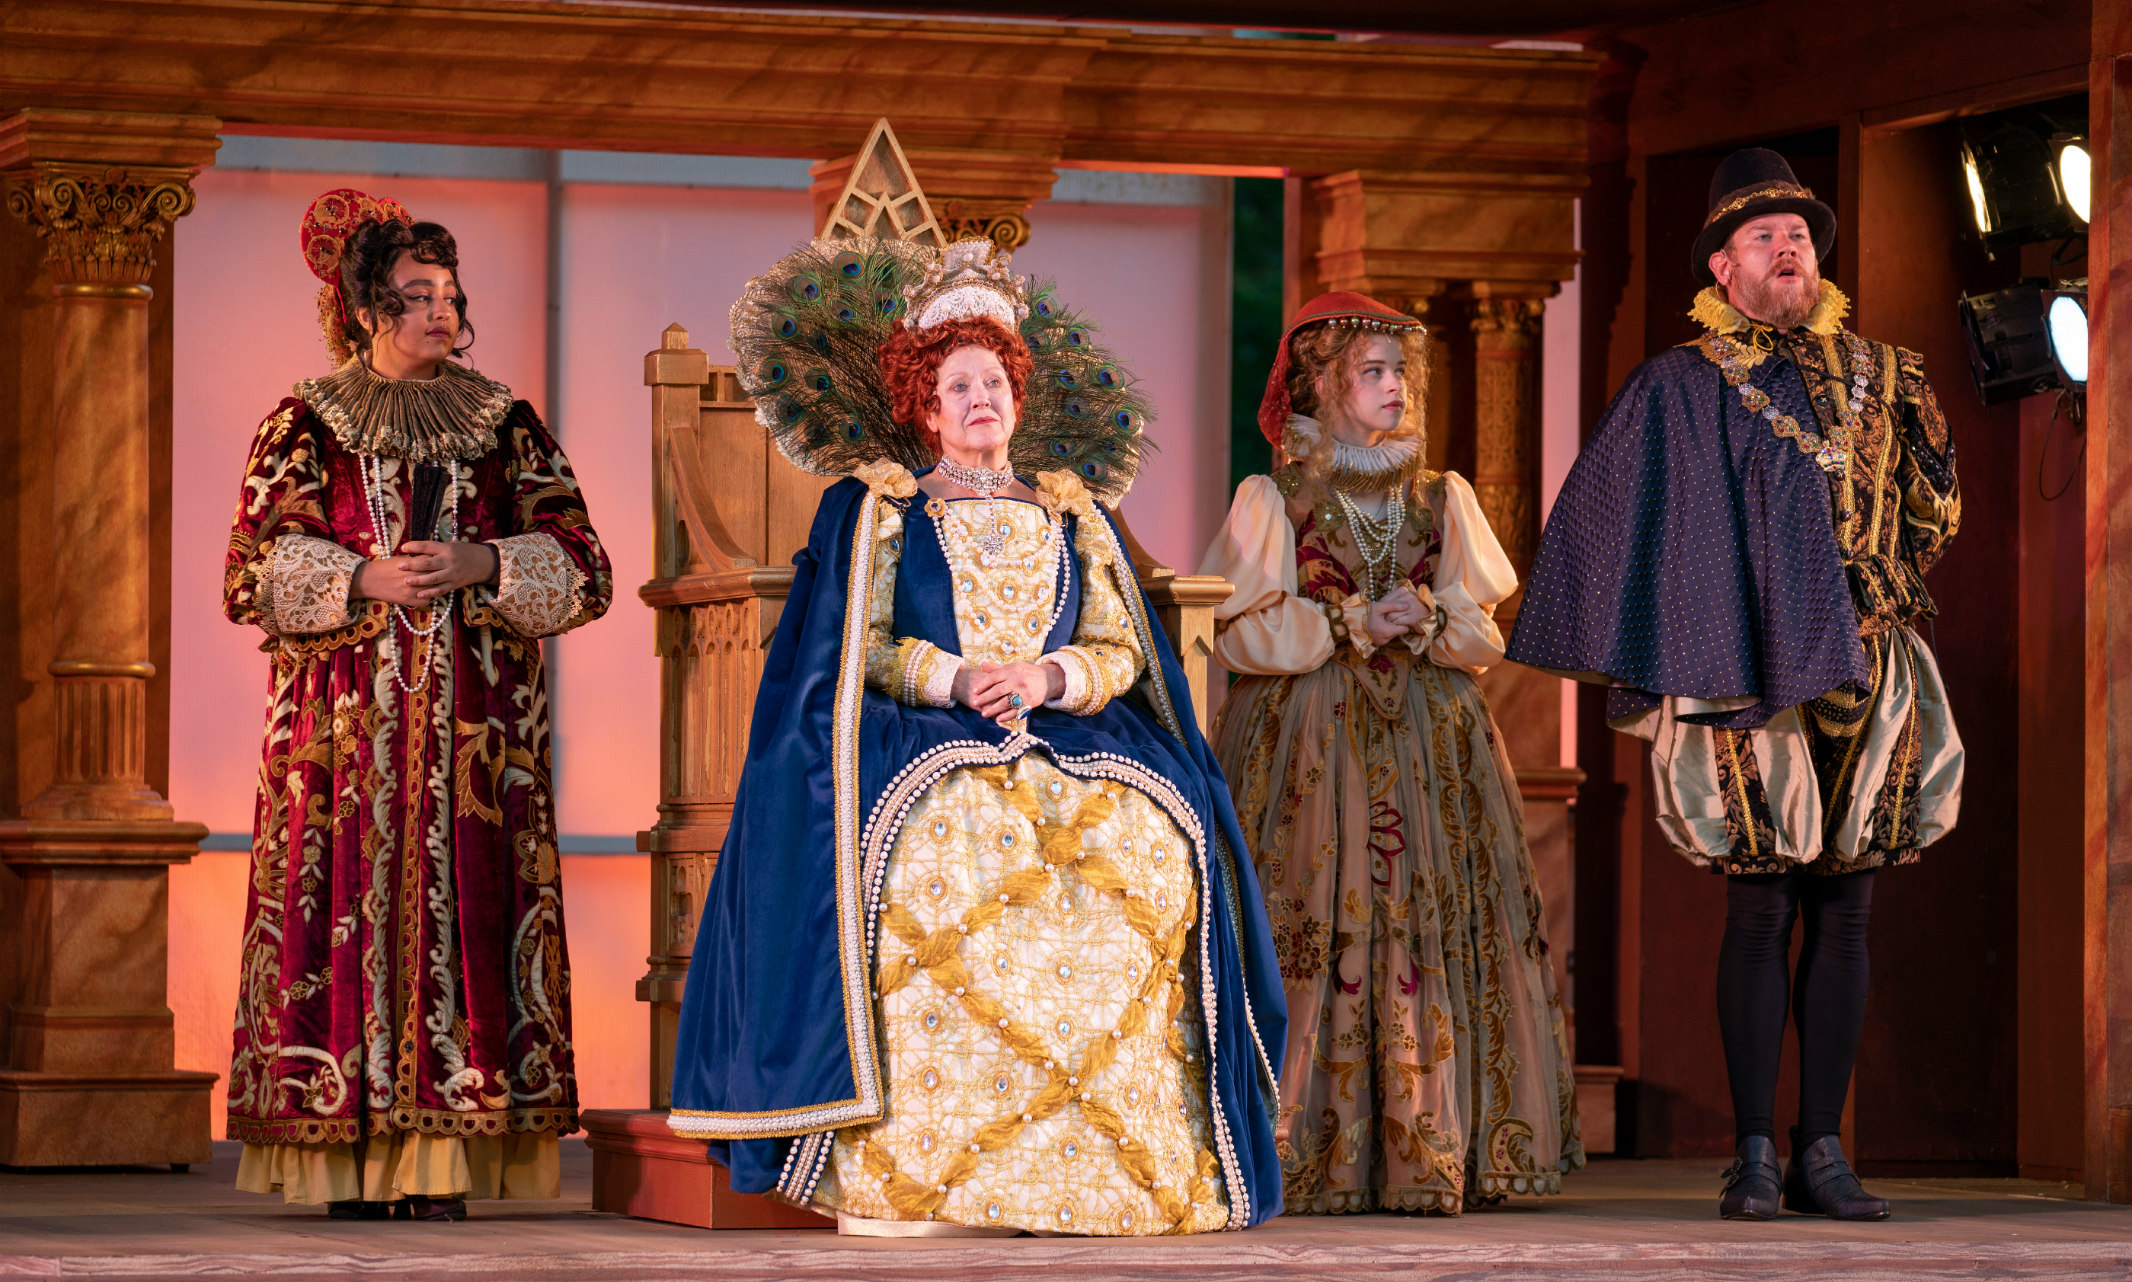 Marisa Tejeda, Jan Rogge, Haddy Wilczewski and Collin Vorbeck onstage for performance of Shakespeare in Love.